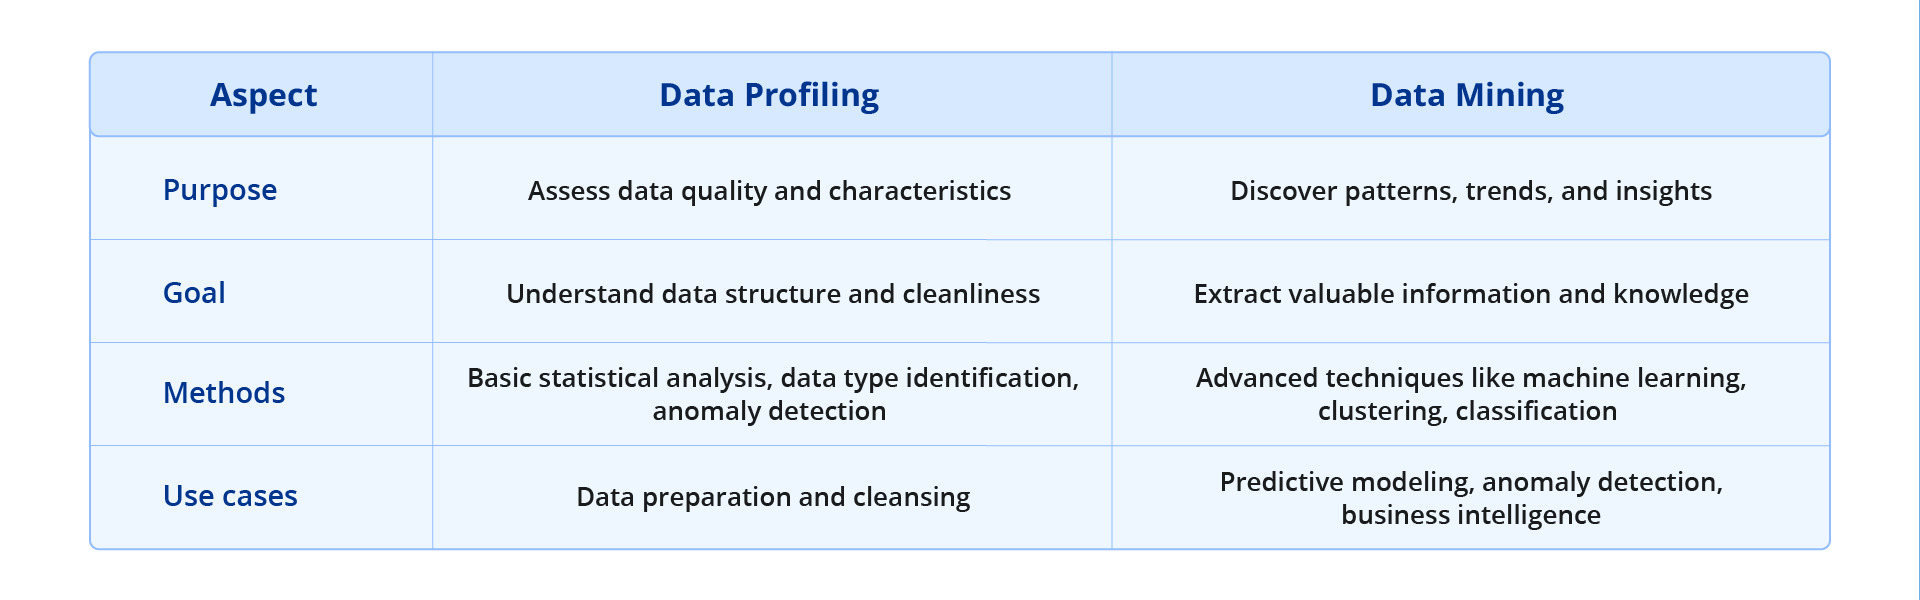 A table listing the differences between data profiling and data mining.